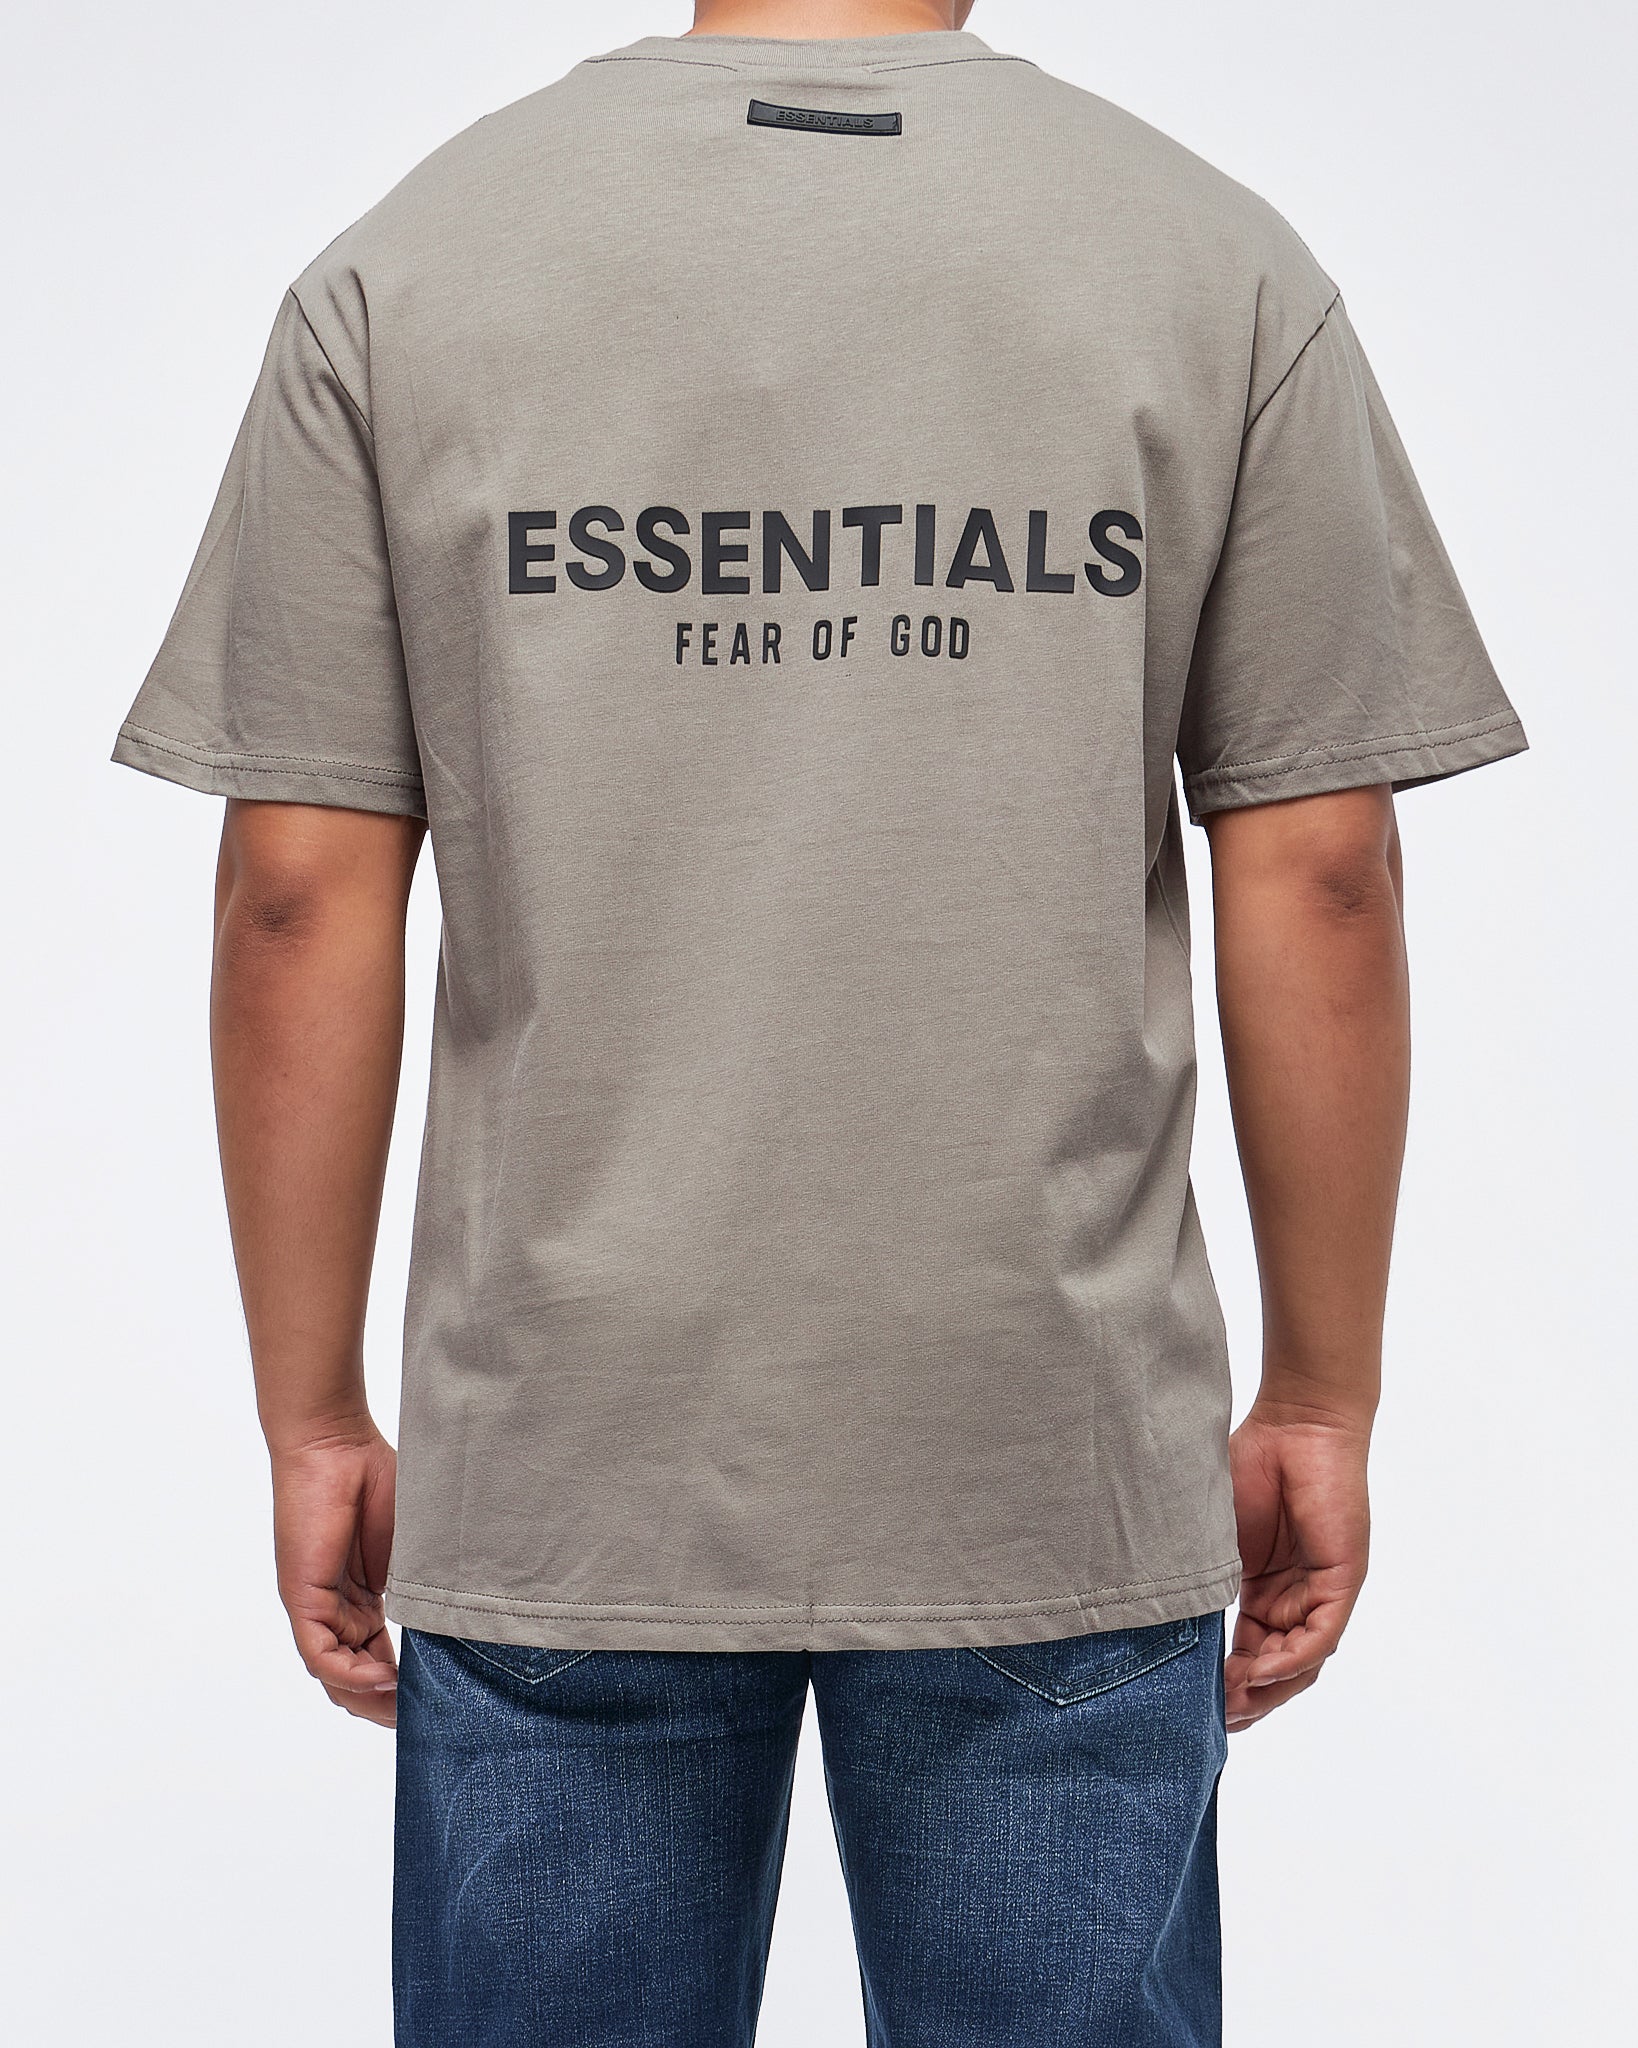 MOI OUTFIT-Essentials Back Printed Men T-Shirt 16.90